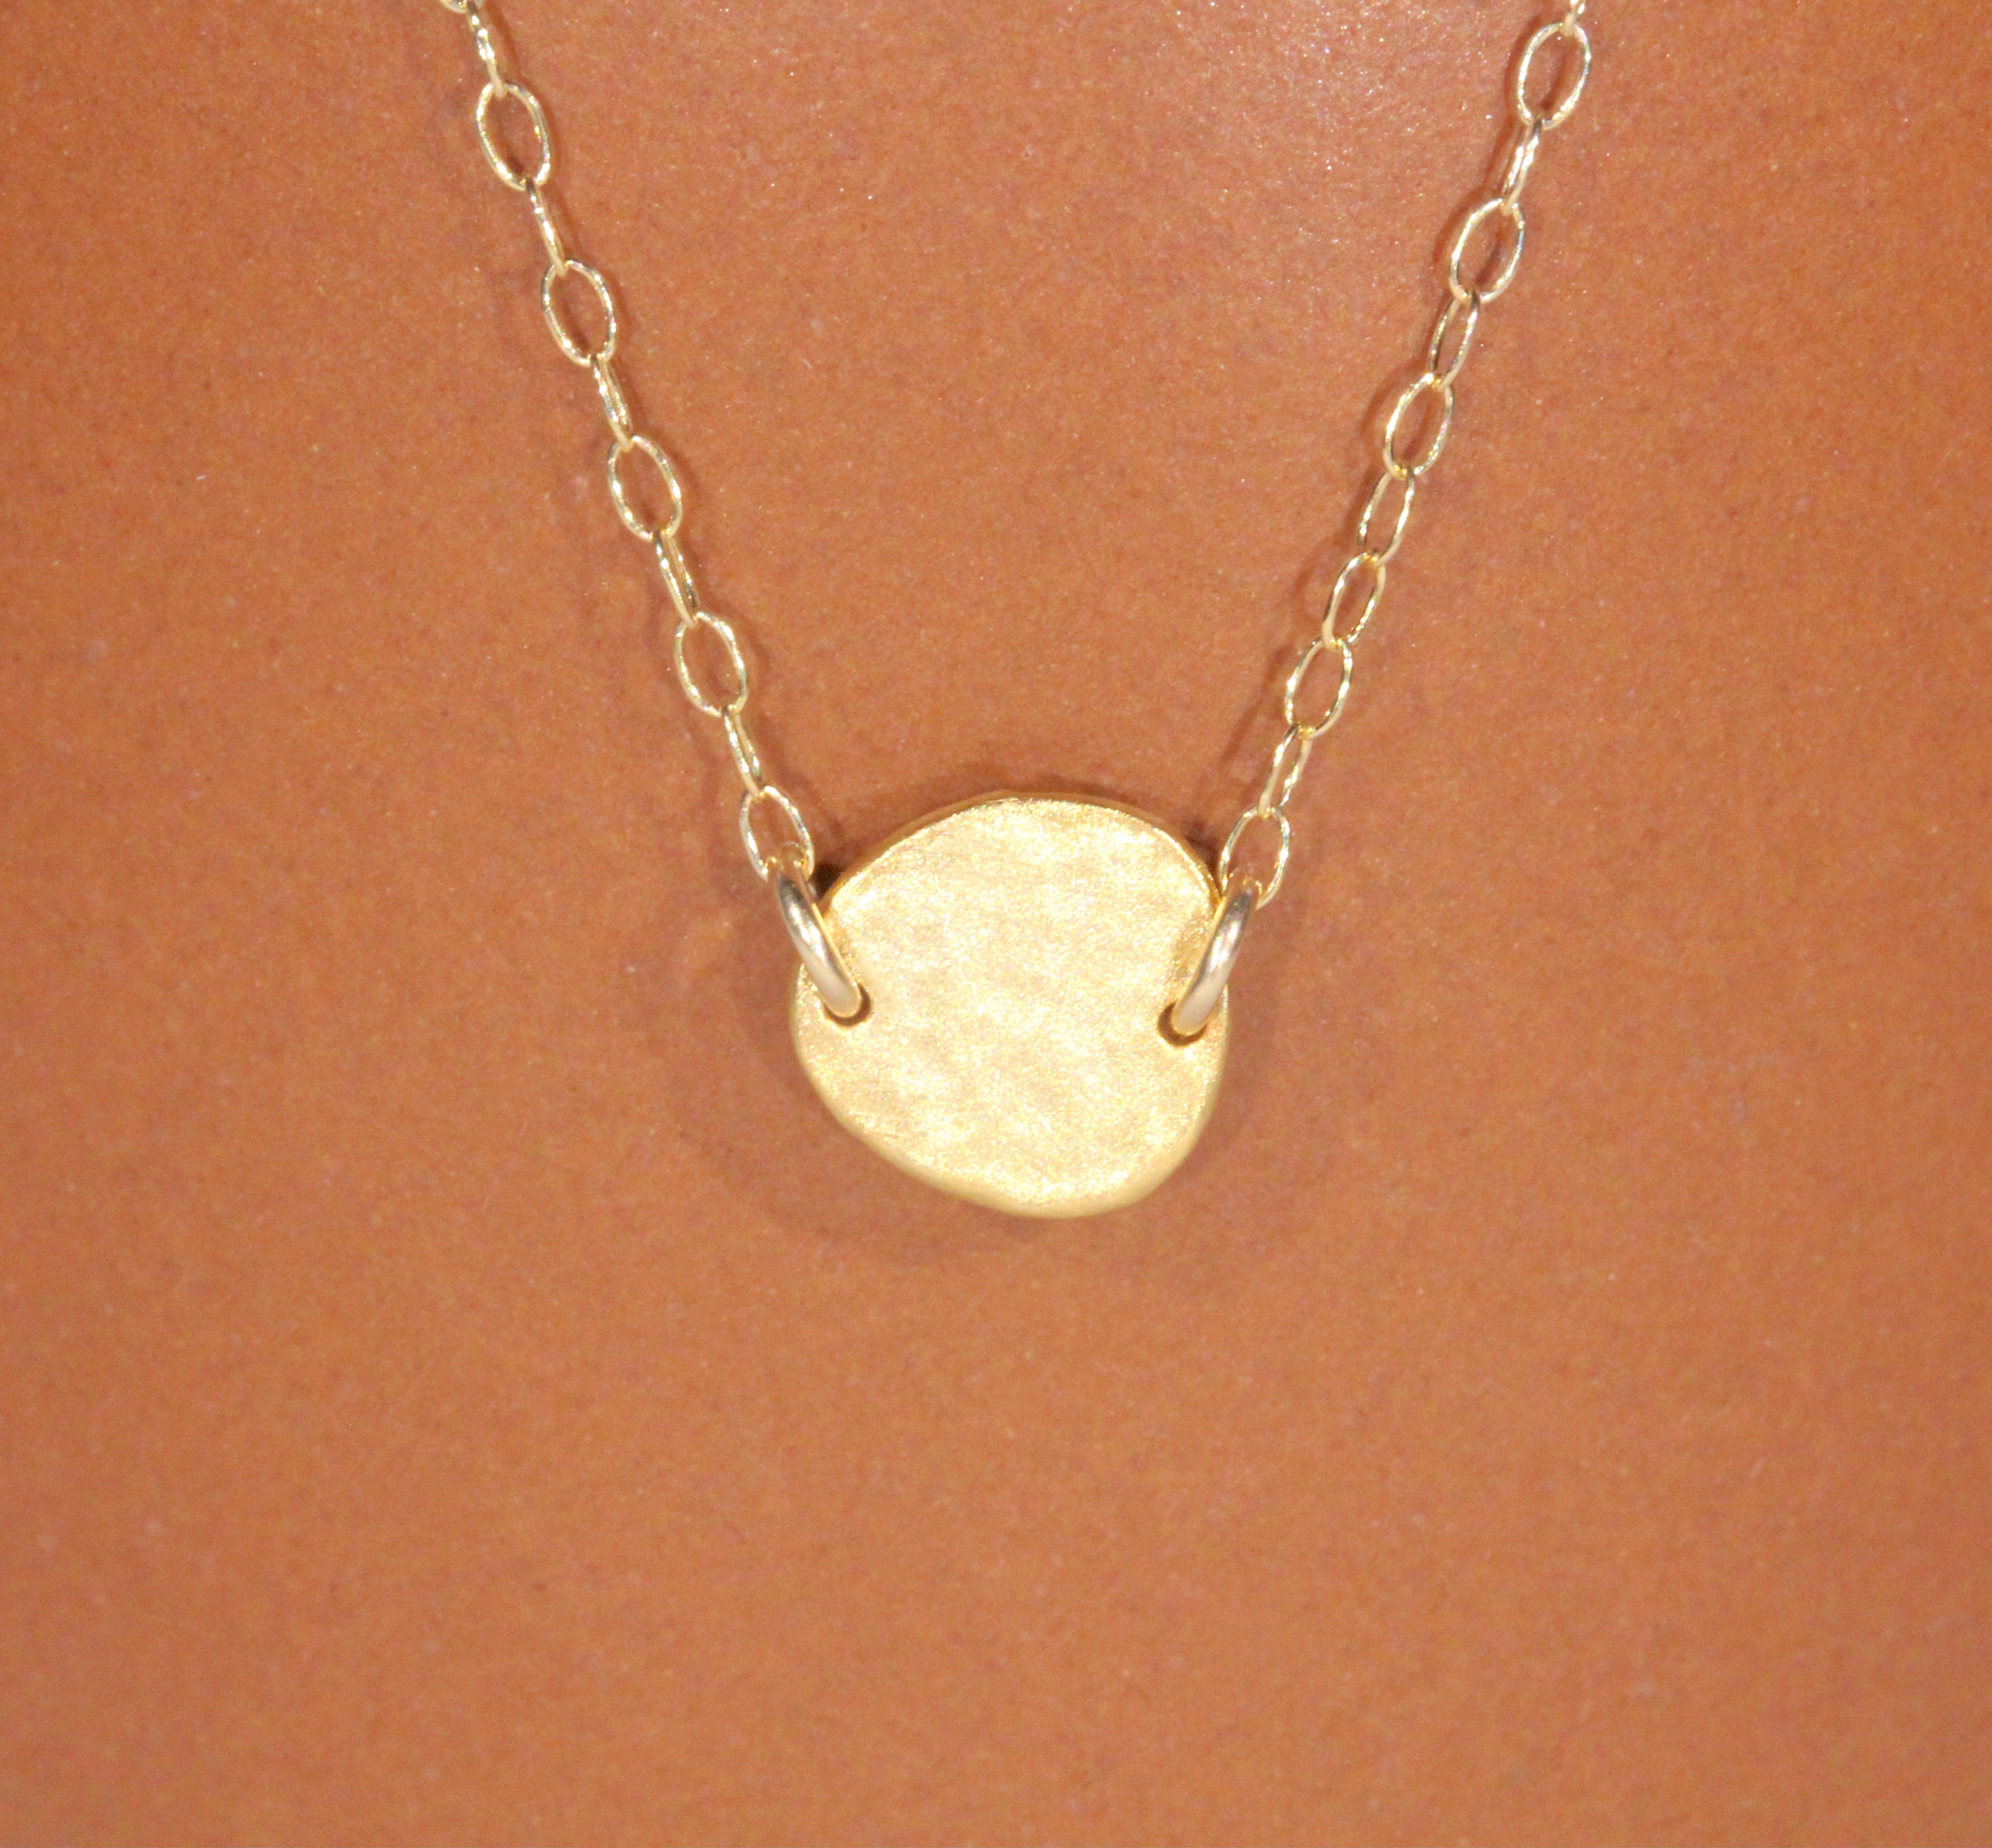 Hammered Disc Pendant Necklace | Skeie's Jewelers